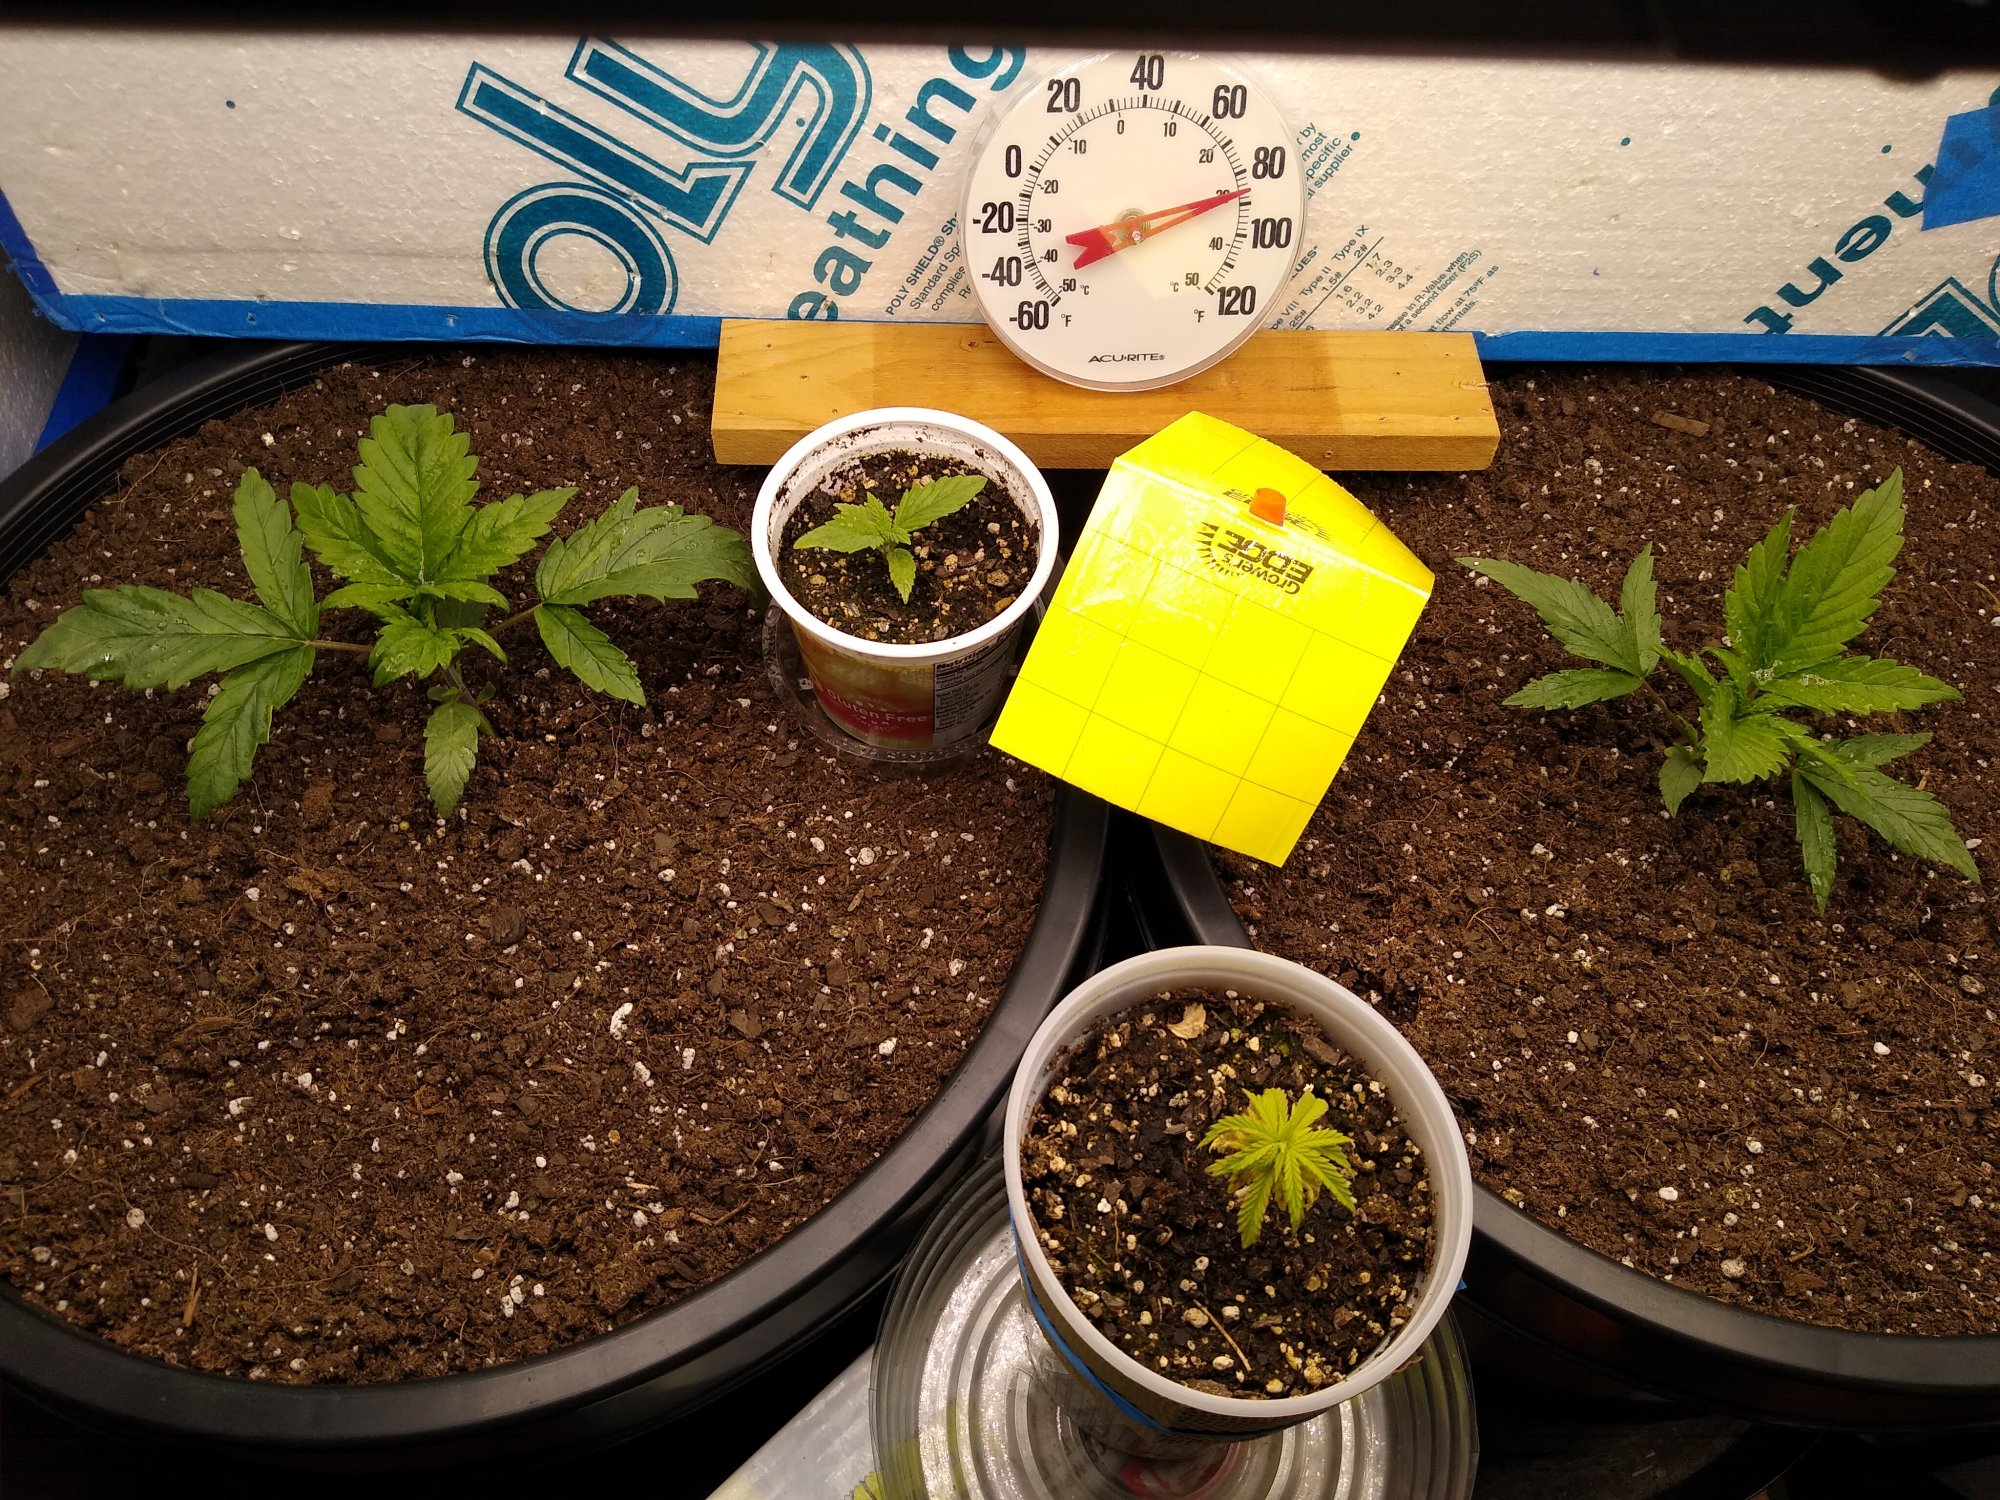 Bag seed grow well they actually  were in  a  plastic  vial 2